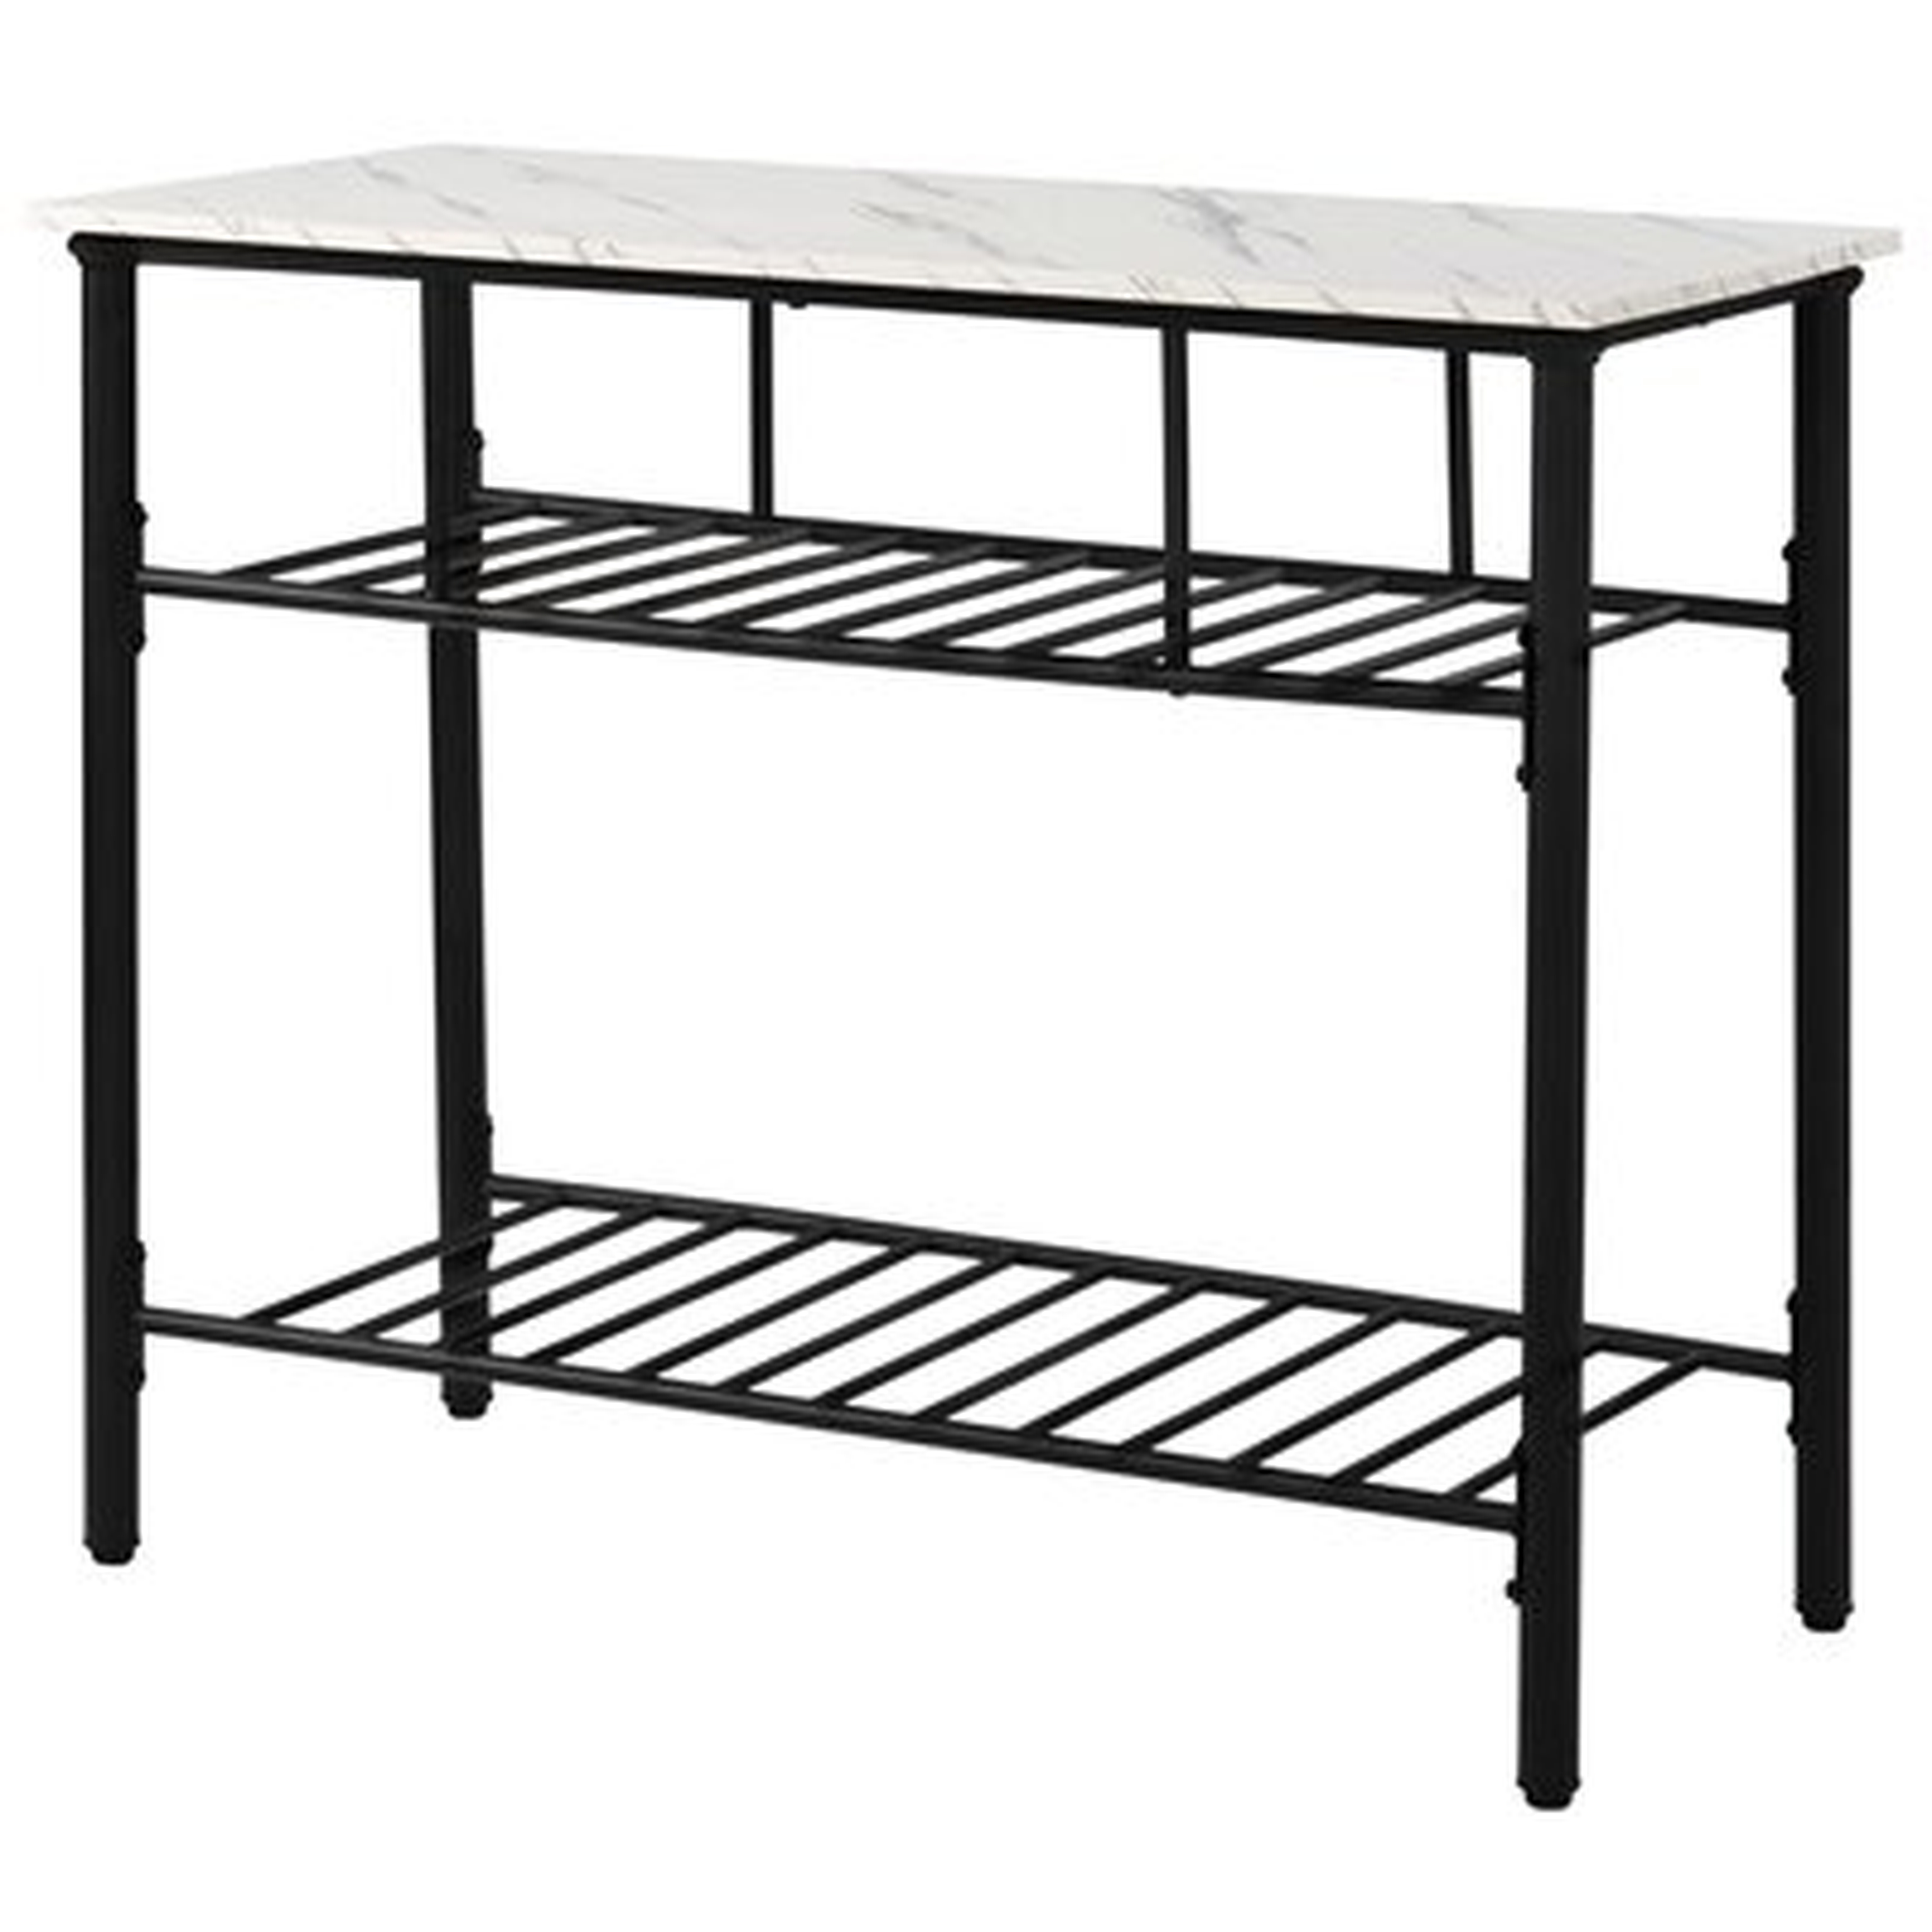 Rustic Farmhouse Counter Height Dining Kitchen Kitchen Island Prep Table, Kitchen Storage Rack With Worktop And 2 Shelves,Faux-Marble, White - Wayfair